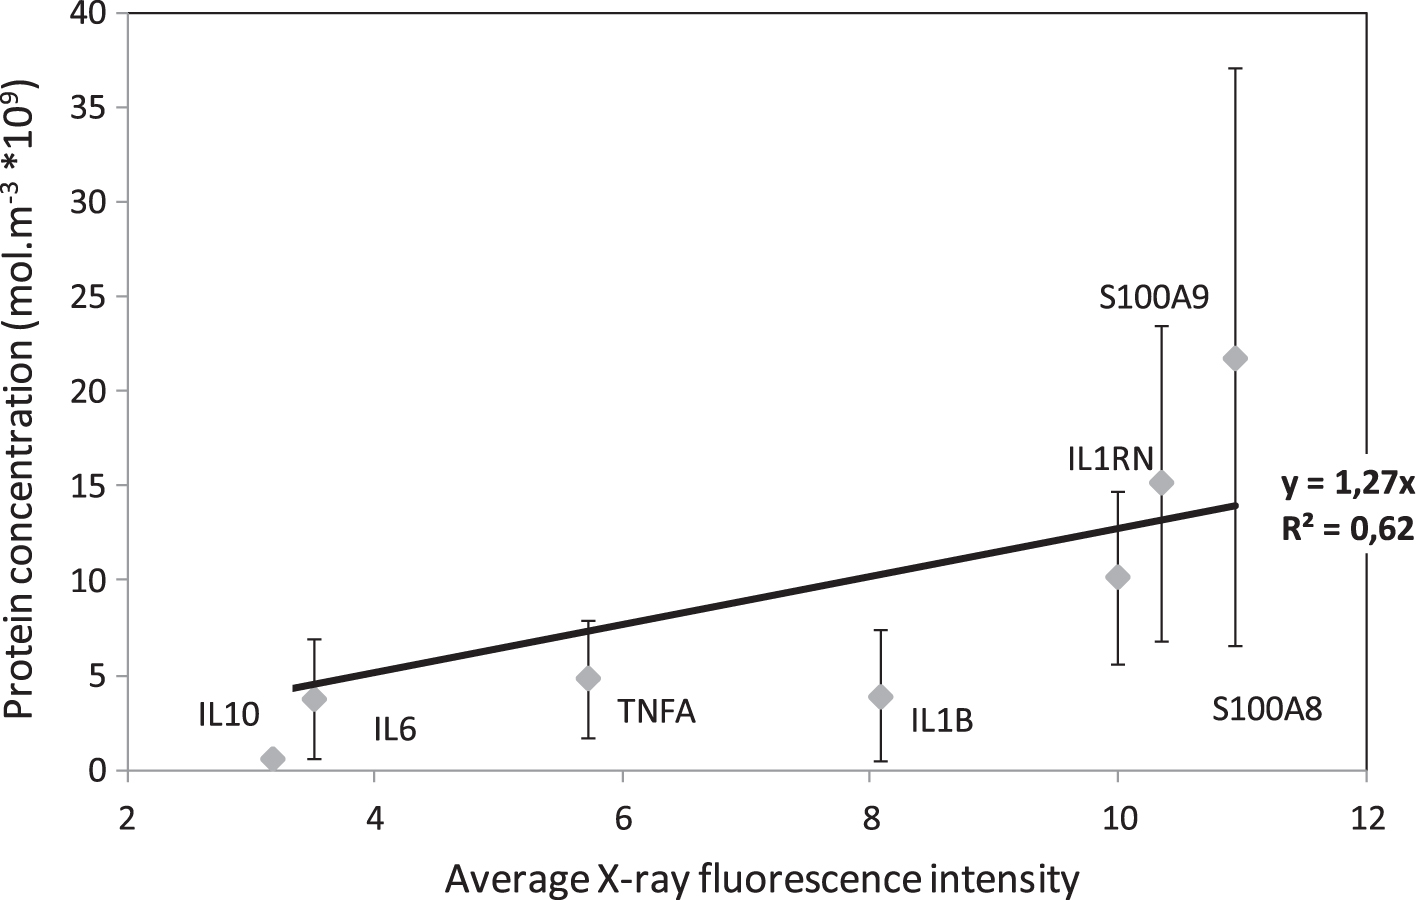 Calibration curve for protein concentration from Average X-ray fluorescence values in healthy patients.